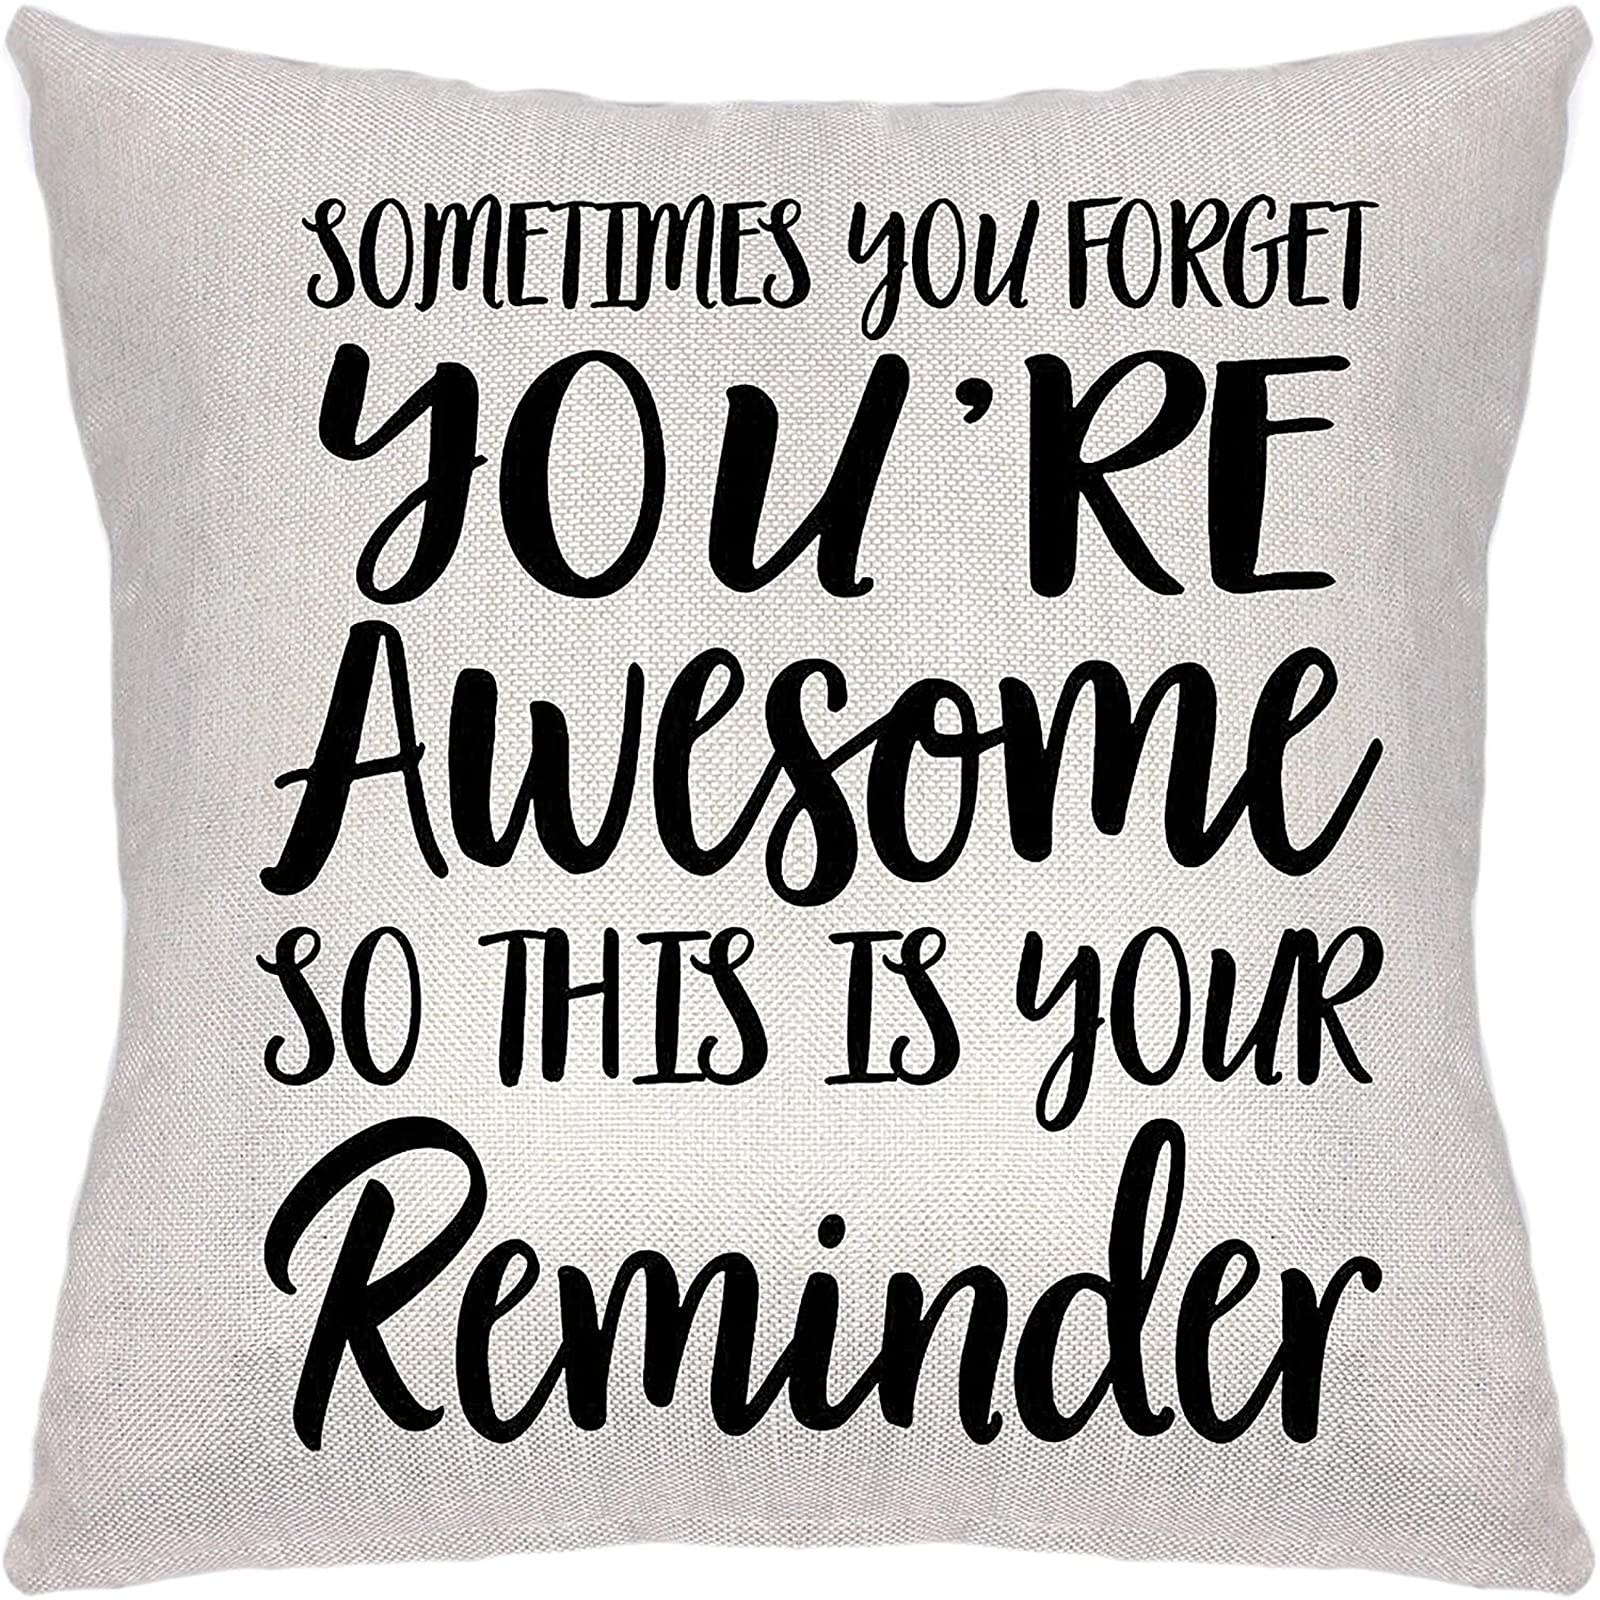 Inspirational Gifts for Women-Throw Pillow Case, Cushion Covers, Gifts for Her,, Birthday Gifts for Women, Best Friend, Mom, Coworker- Cotton Linen Cushion Cover for Sofa Bed